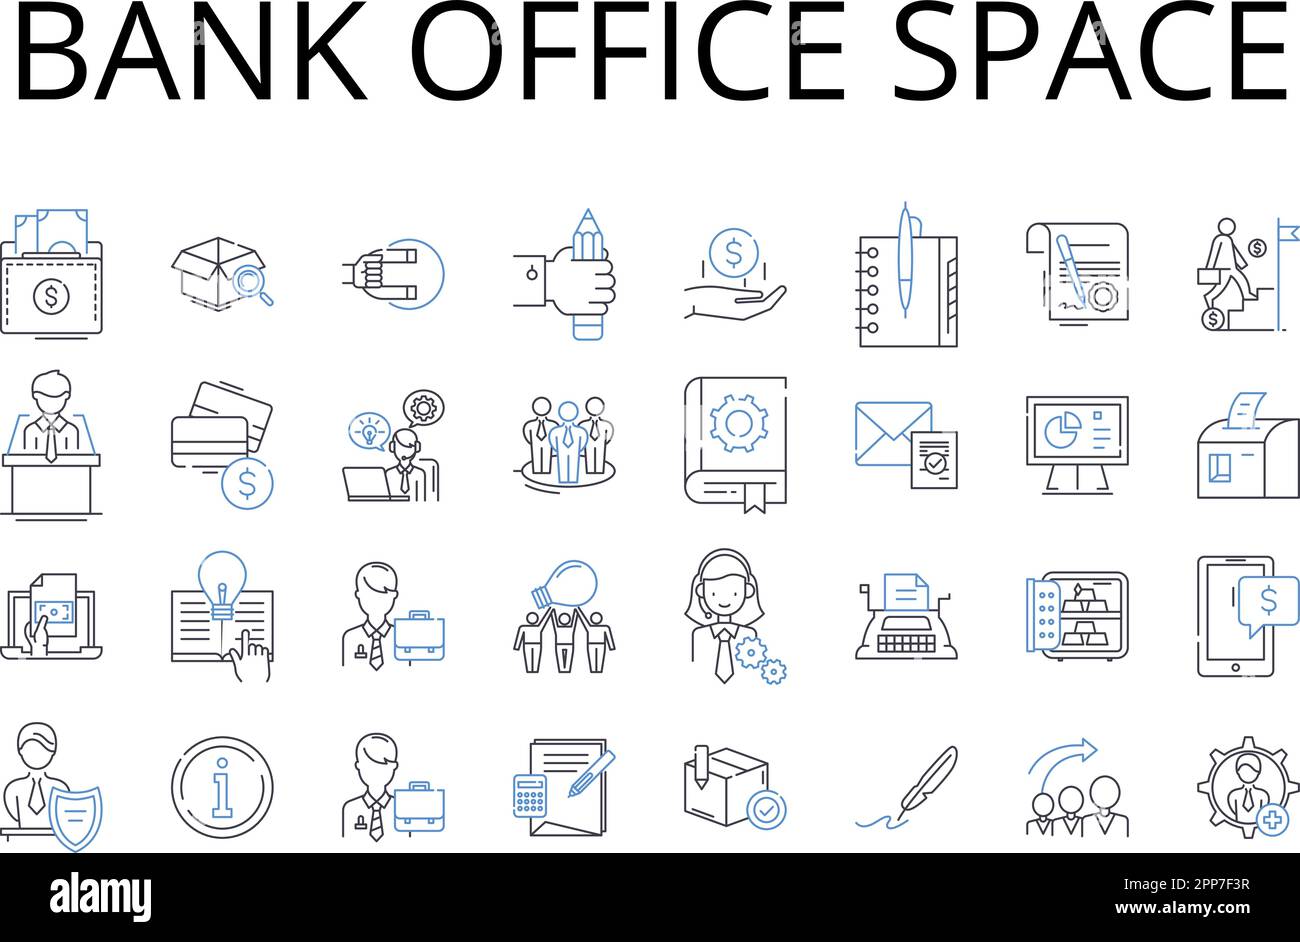 Bank office space line icons collection. Financial institution premises, Banking establishment area, Cash handling office, My management space Stock Vector